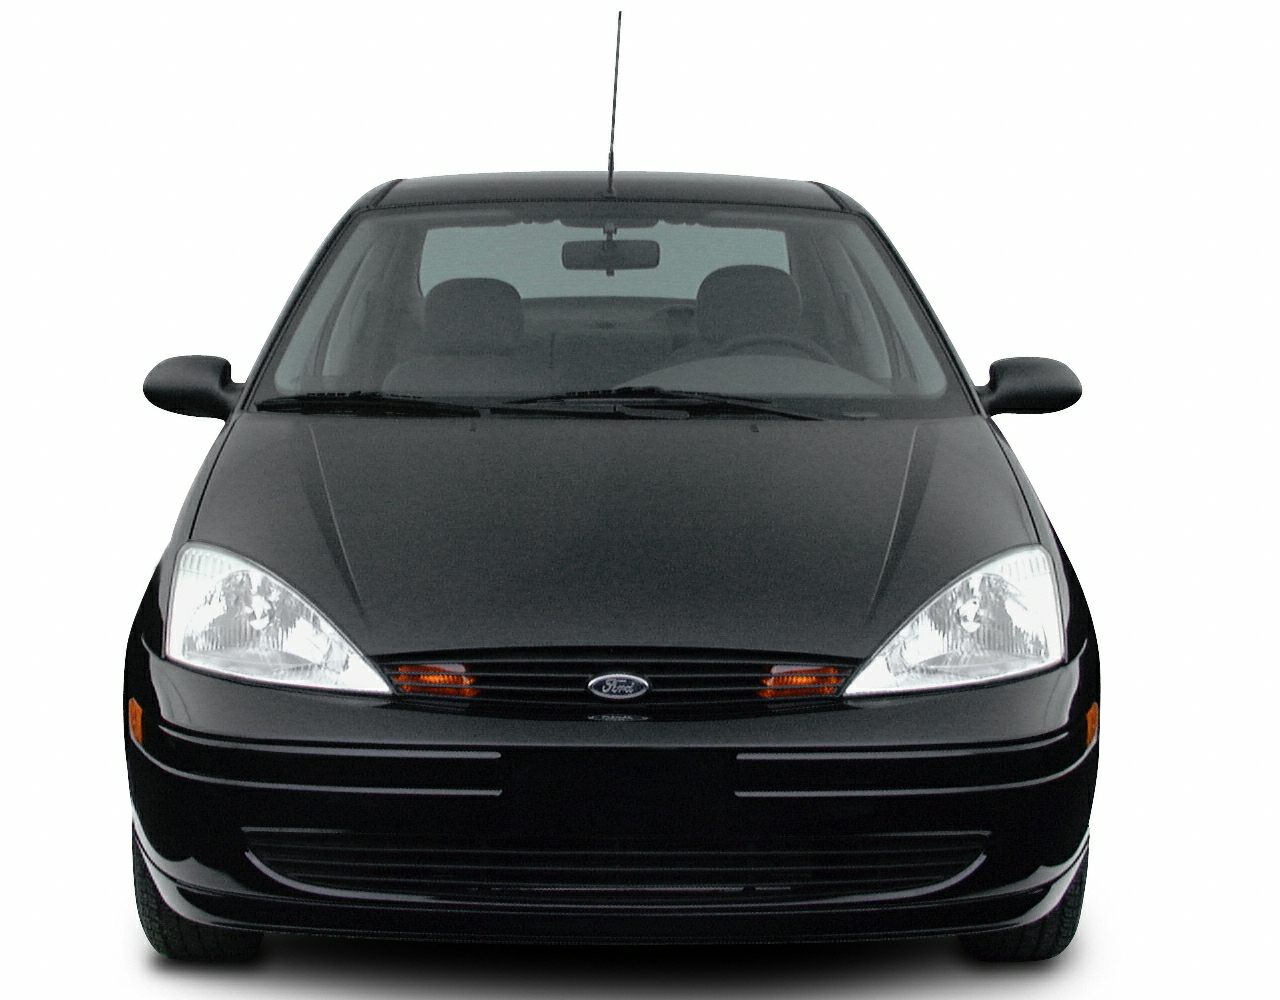 2001 Ford focus zts reliability